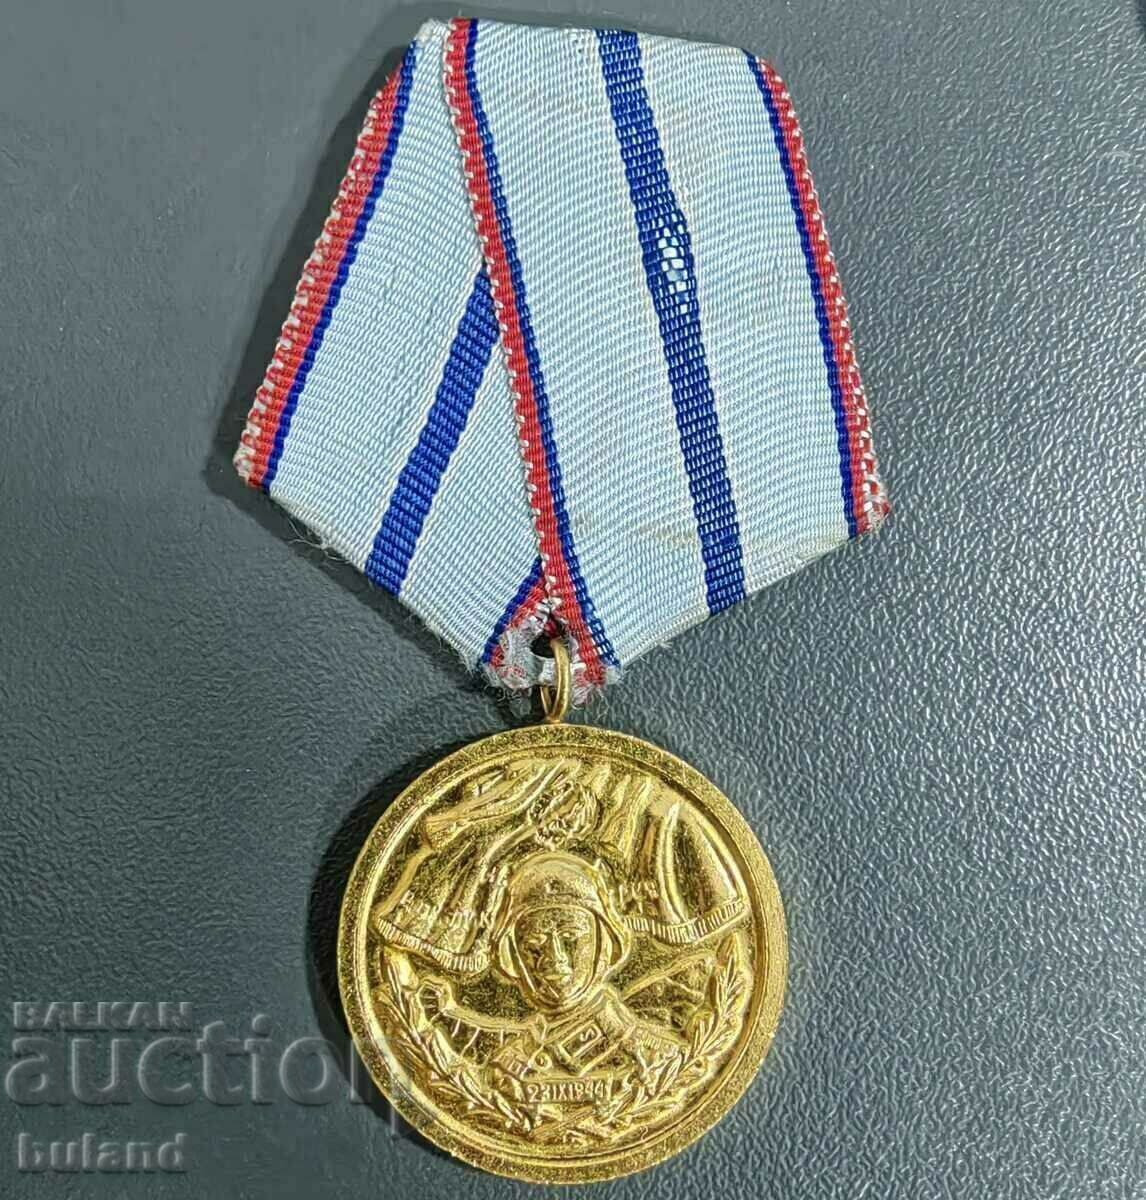 Bulgarian Social Medal 20 years. Flawless Service in the BNA NRB Army